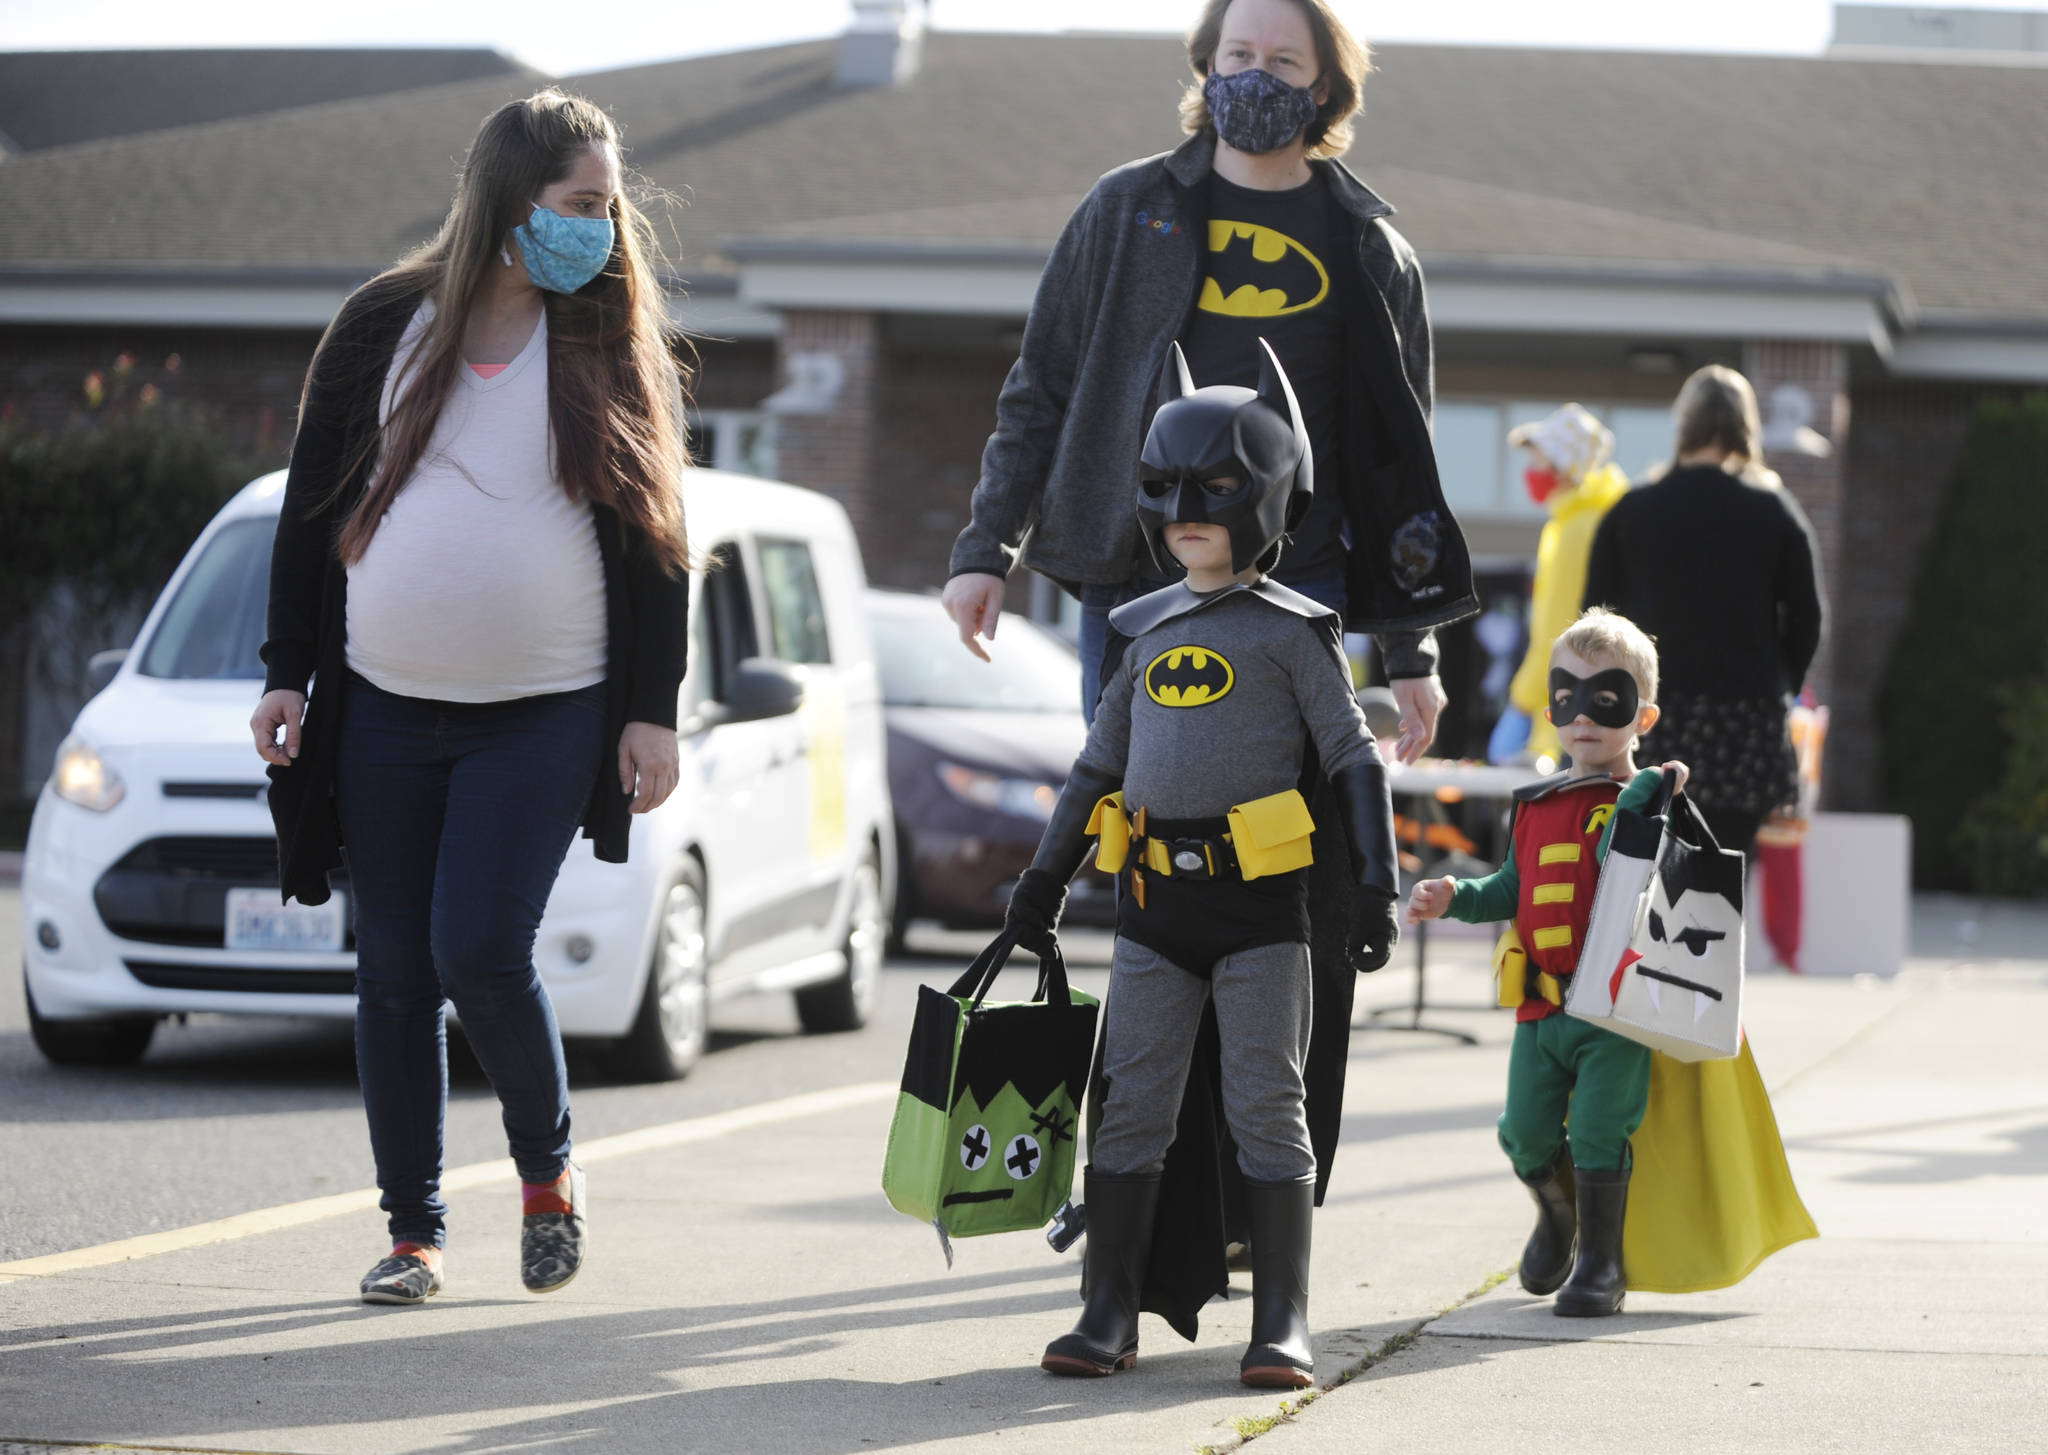 The Dynamic Duo of Batman and Robin (Truman, 5, and Archer, 2), accompanied by parents Luke and Aubrey Leishman of Sequim, enjoy some trick-or-treating at the Sequim High School’s Halloween event, modified this year for drive-thru and walk-thru guests. Sequim Gazette photos by Michael Dashiell